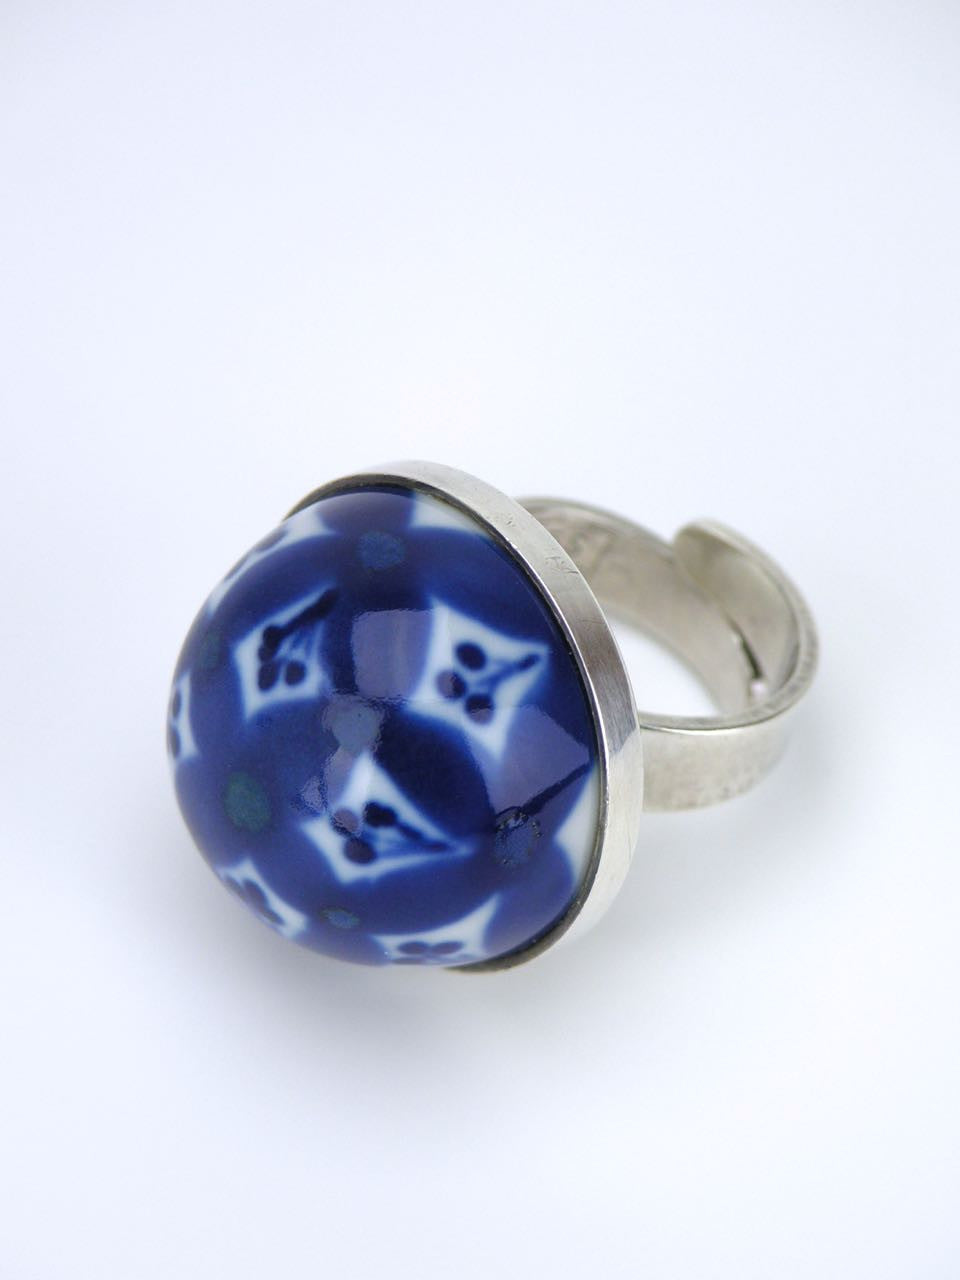 Norwegian silver and blue glazed porcelain dome ring